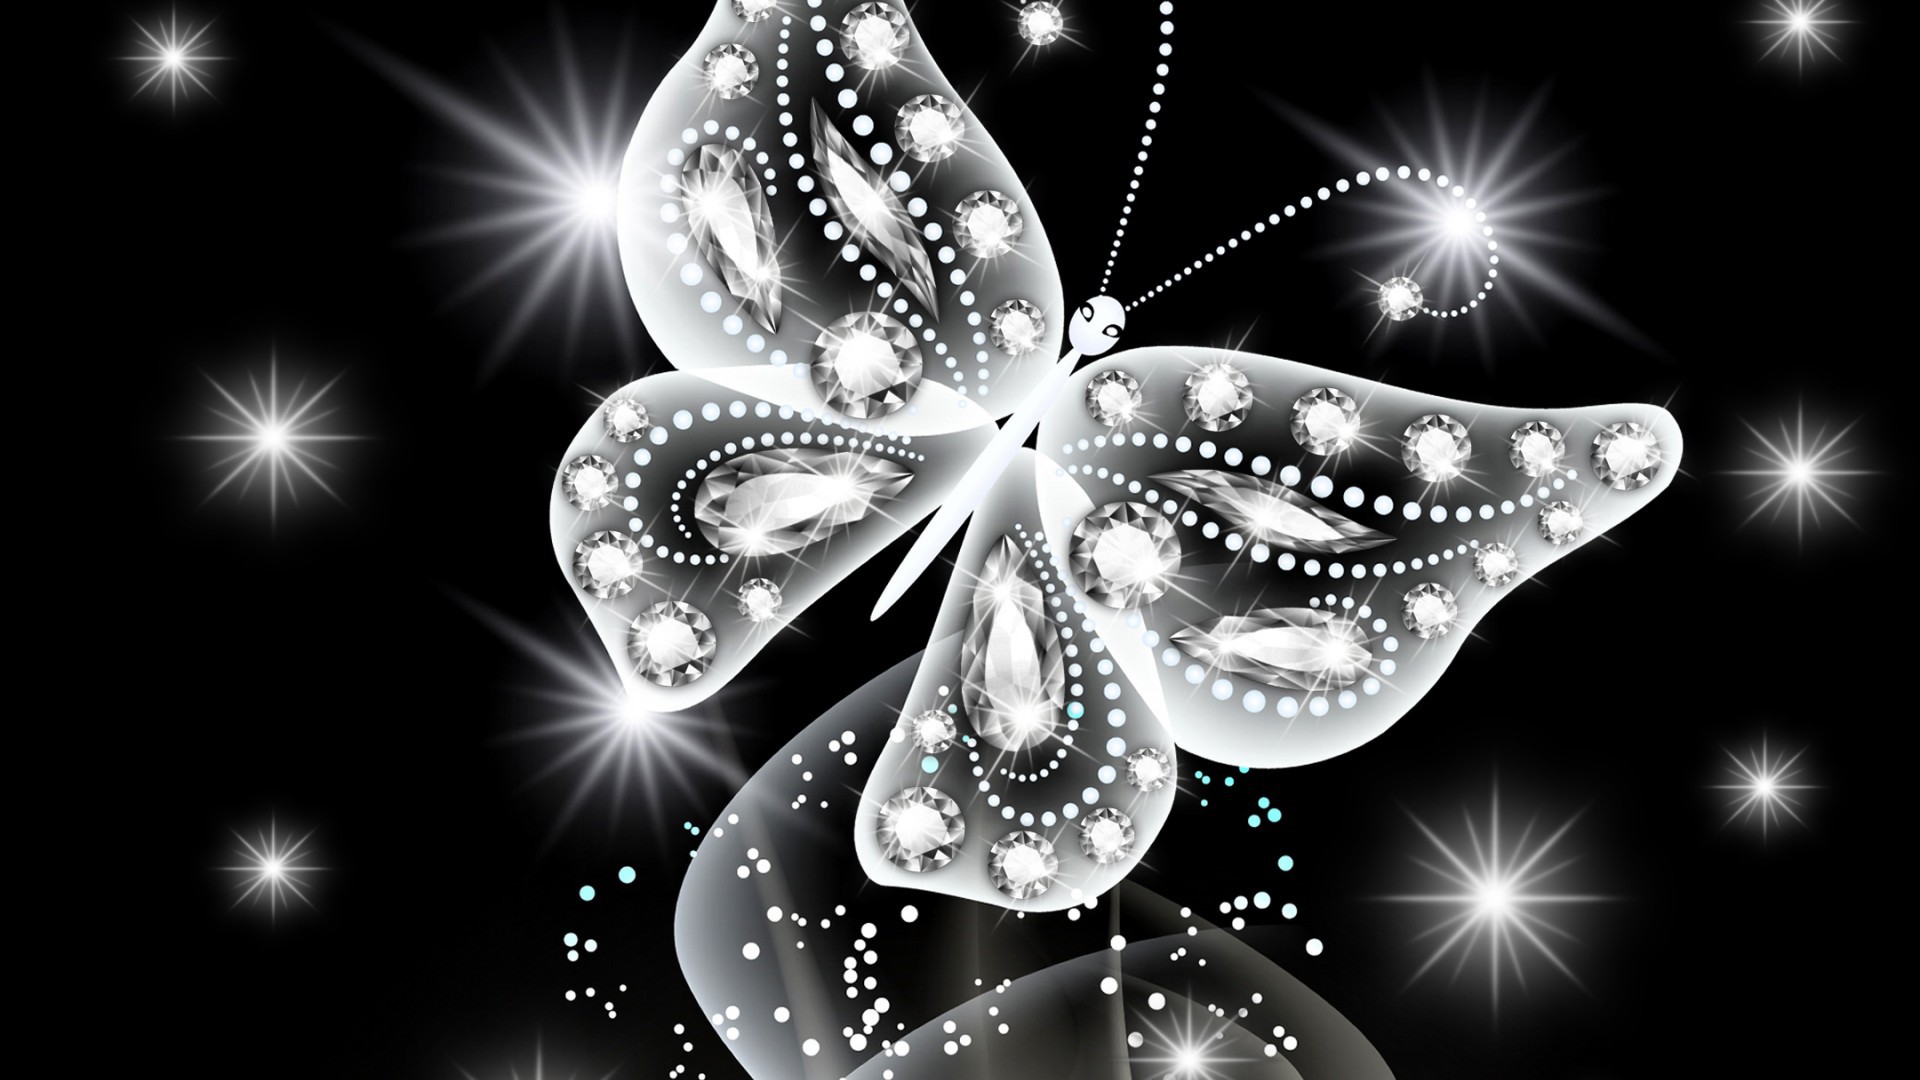 Black Butterfly wallpapers and images - wallpapers, pictures, photos